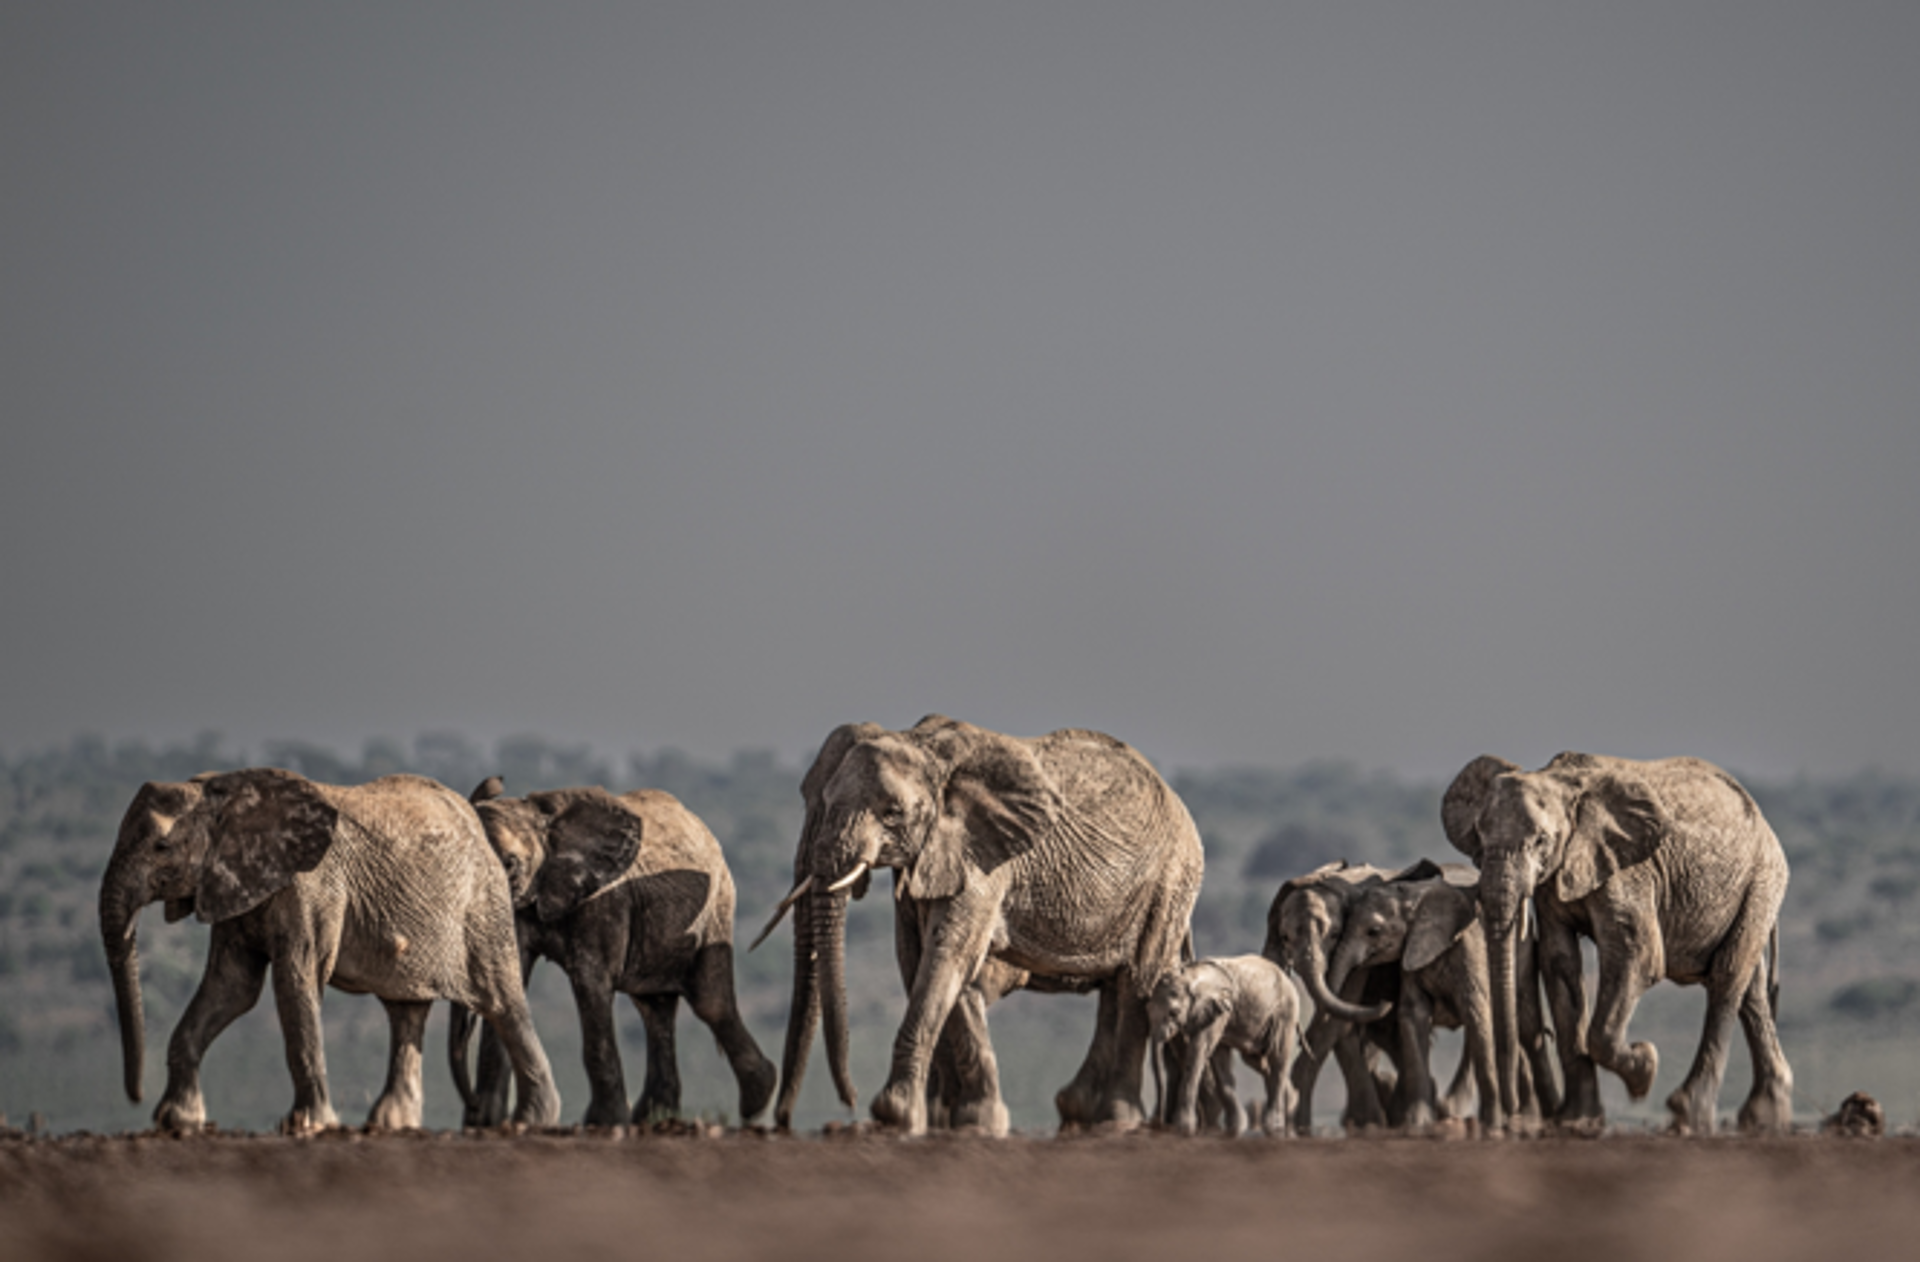 Amboseli Dreaming by Kyle Smith